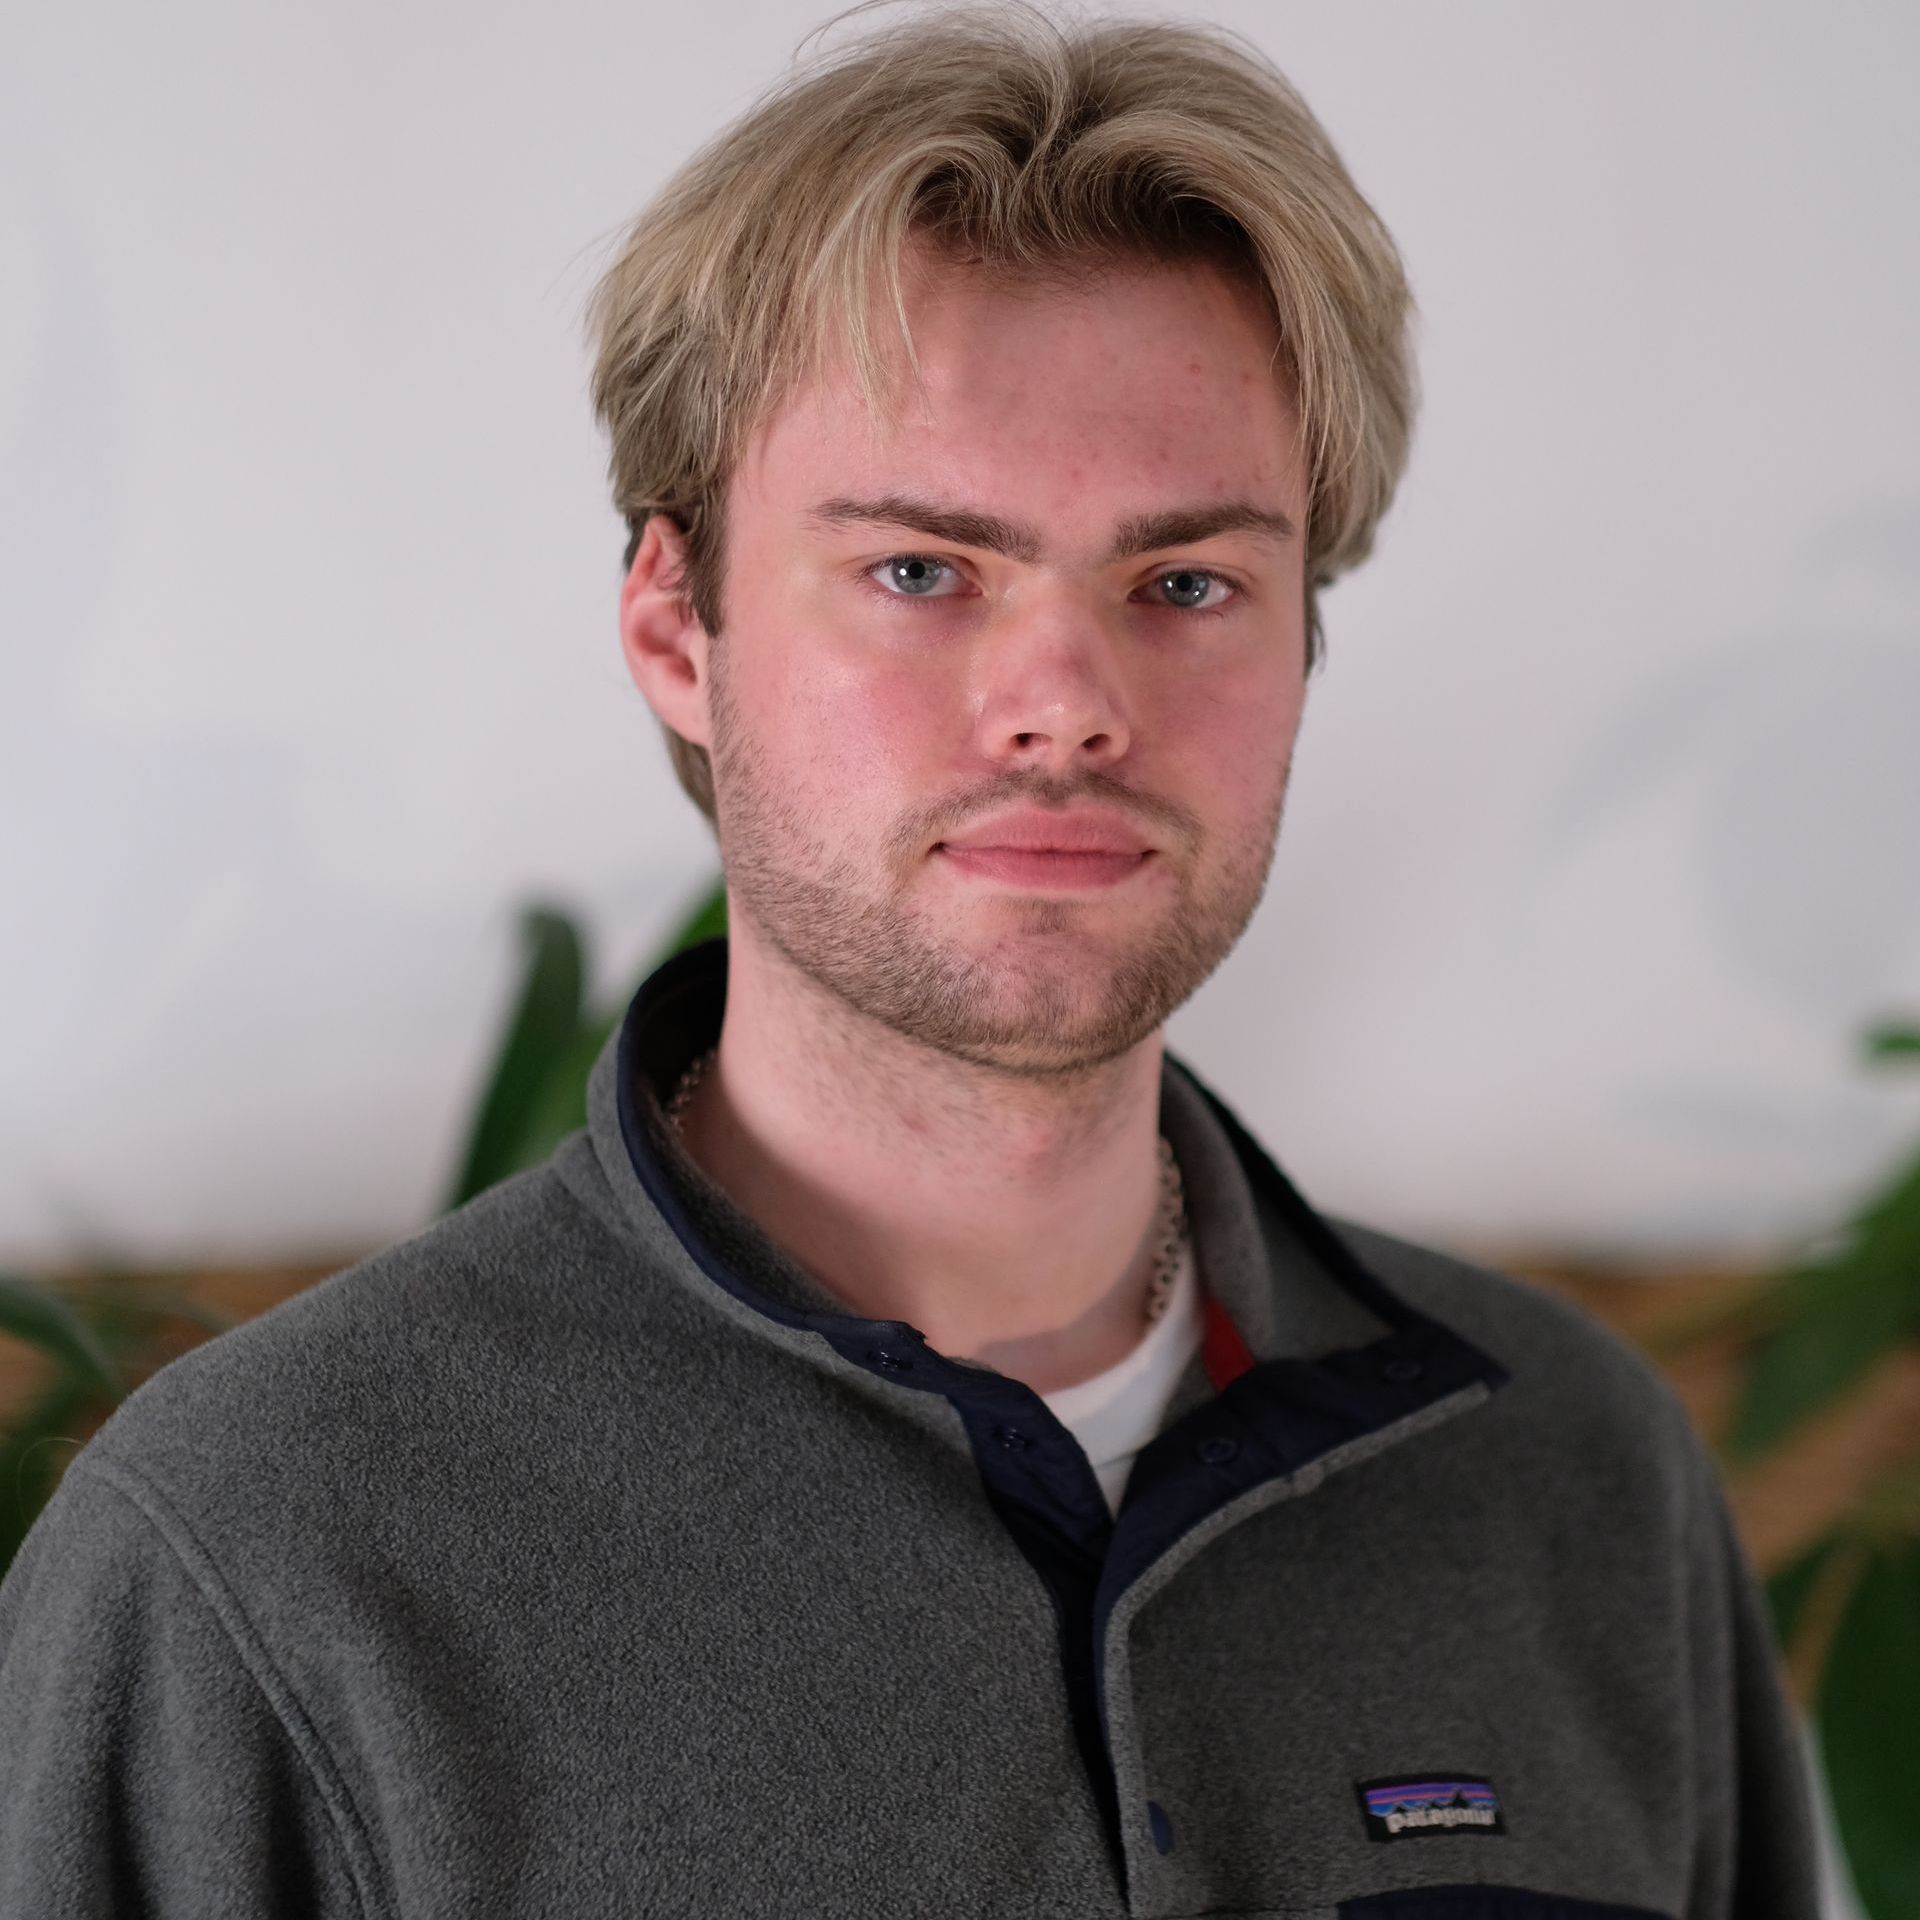 Headshot: a white man with blond hair and stubble looks into the camera wearing a fleece with a zip